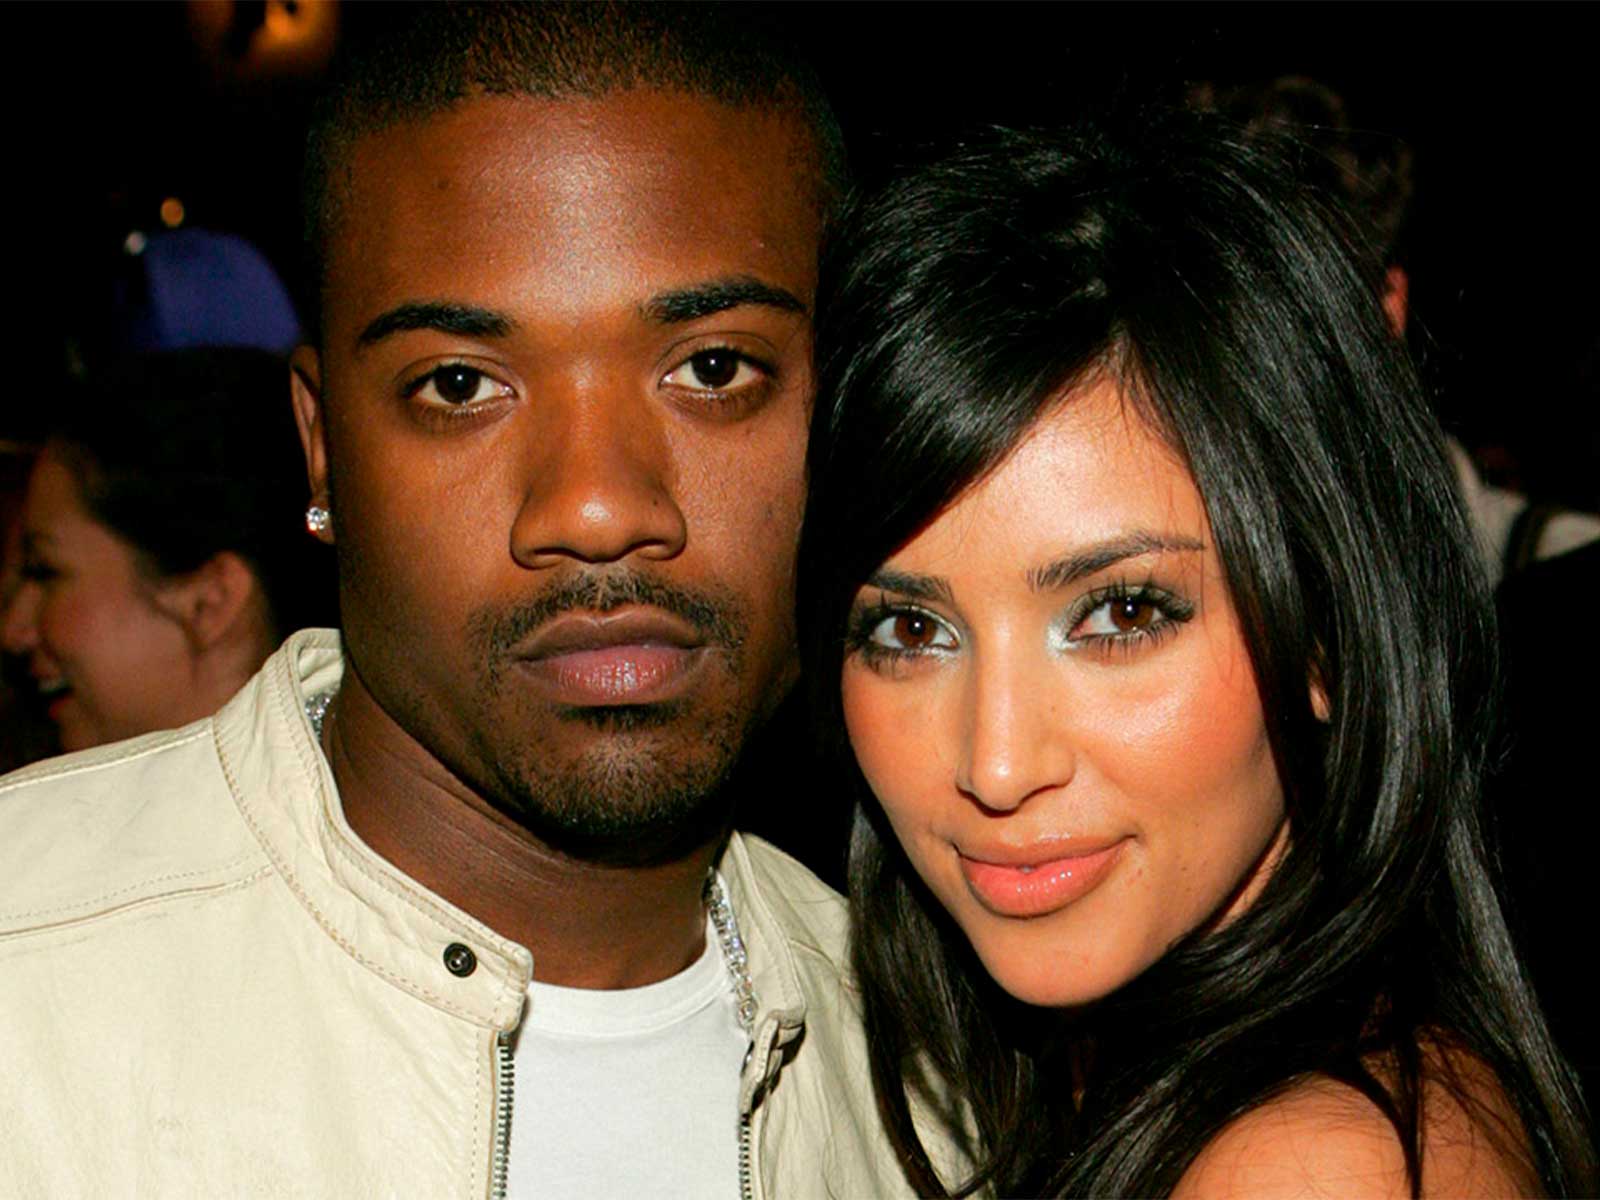 Ray J claims he didn’t give Kanye West his sex tape with Kim Kardashian